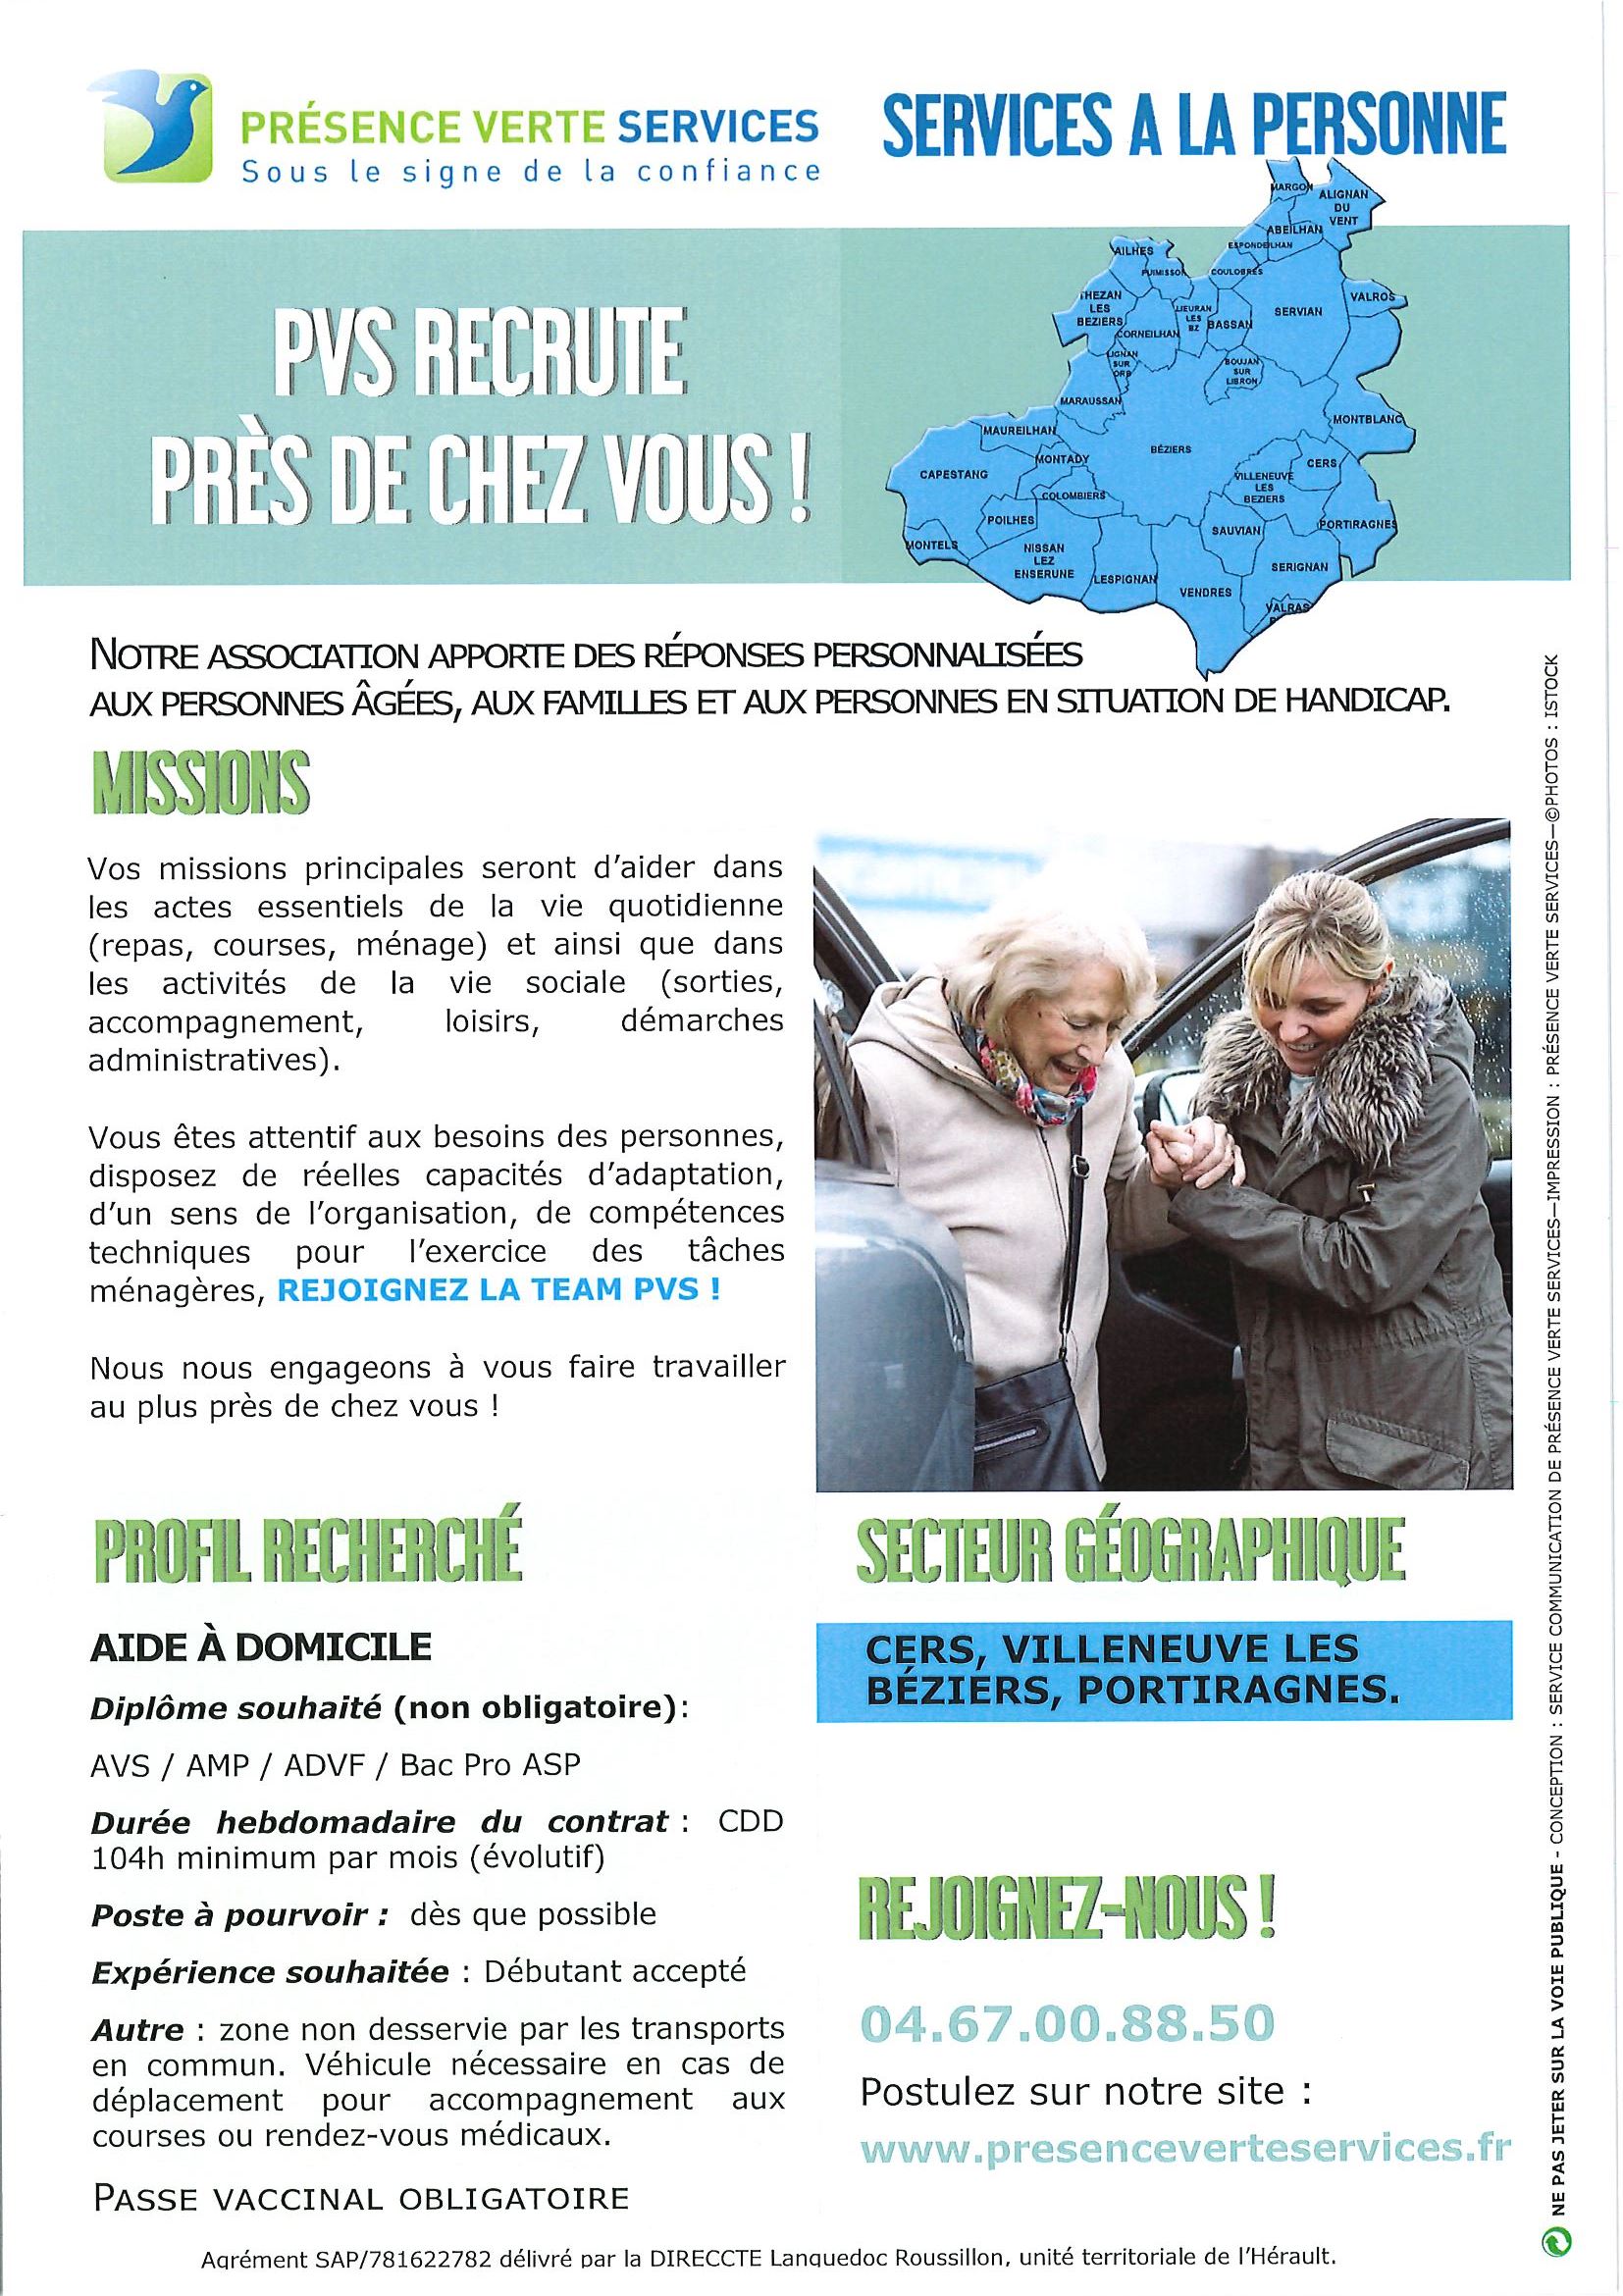 You are currently viewing Présence verte recrute